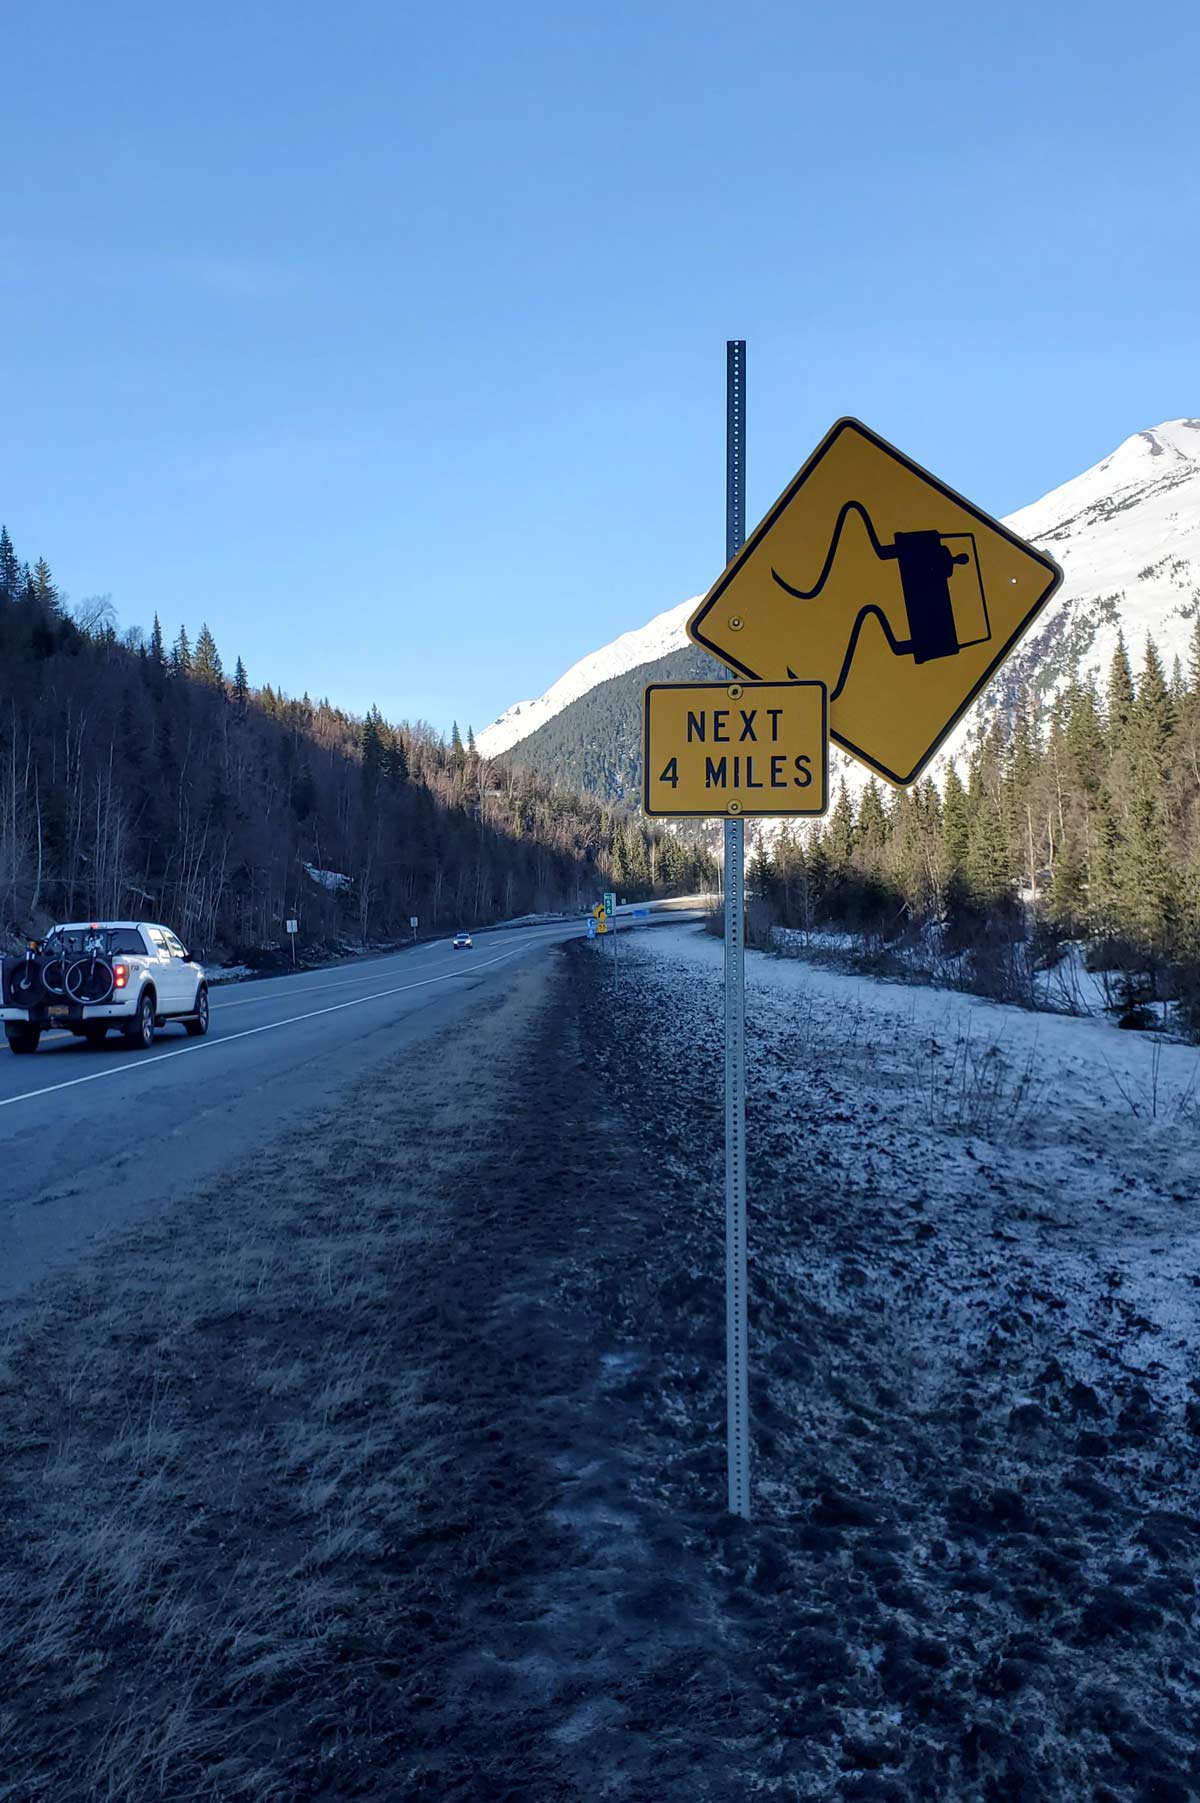 This section of road in Alaska is for experts only